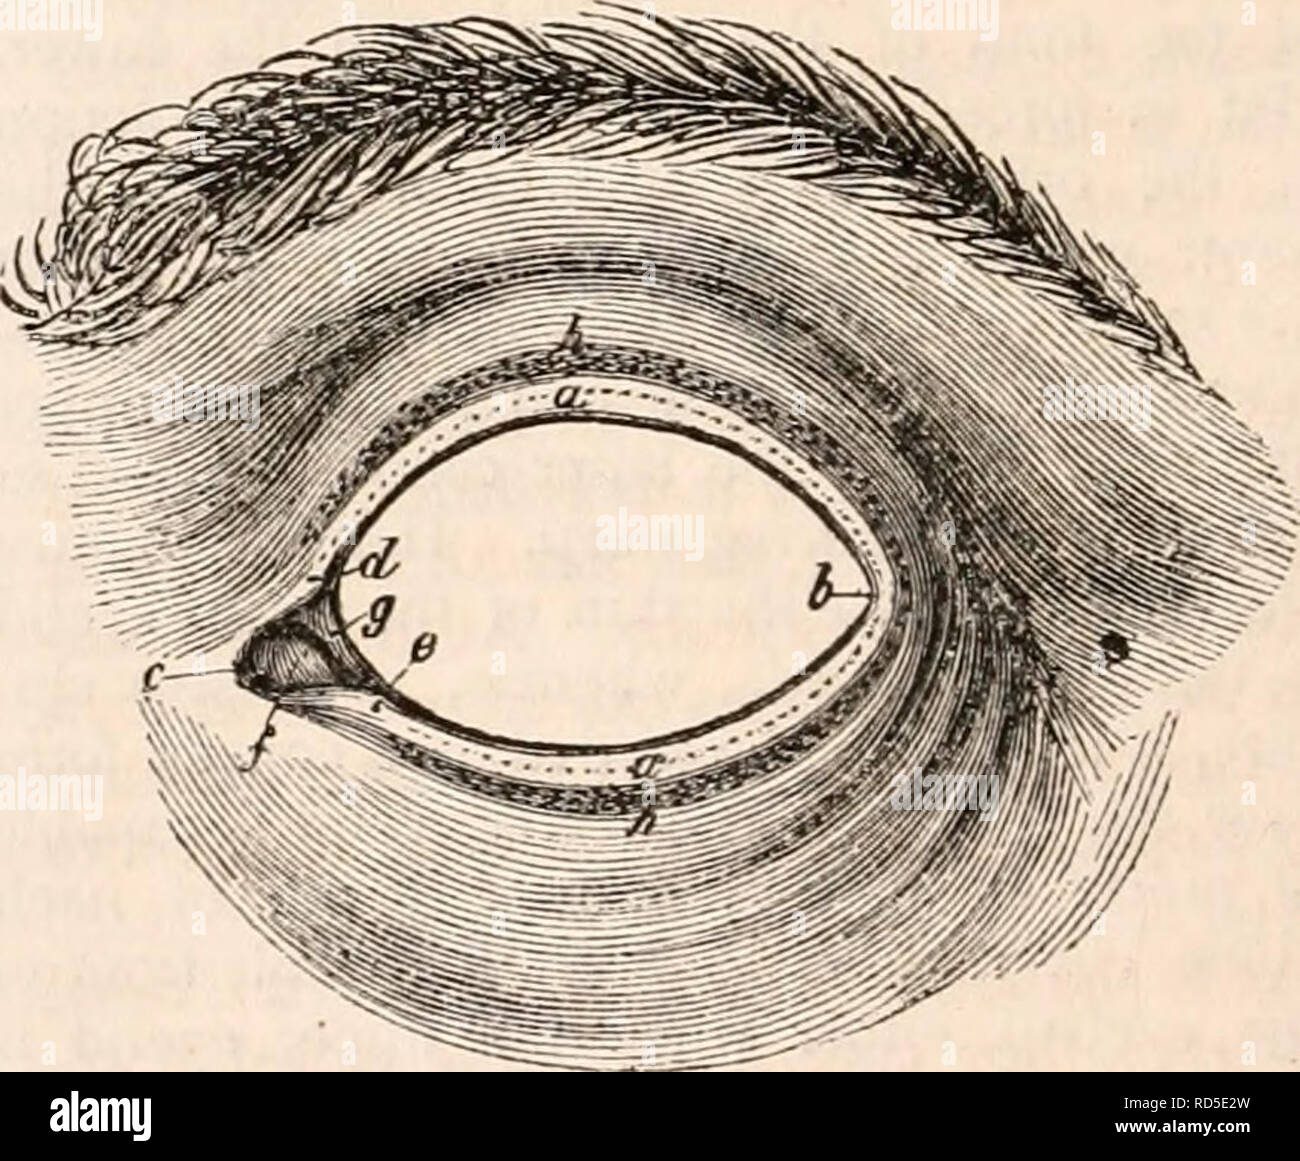 . The cyclopædia of anatomy and physiology. Anatomy; Physiology; Zoology. 80 LACRYMAL ORGANS. hence, when the eye is open, the apex of the angle formed by the inner canthus is broader and to a much greater degree prolonged than the outer; it is also rounded and turned down- wards, but likewise in a much greater degree. The margins bounding the secondary fissure being destitute of cartilage are riot firm and square but soft and rounded. Where the margin of either eyelid is con- tinued into the margins bounding the secon- dary fissure in question, there is observed on slightly everting the eyeli Stock Photo